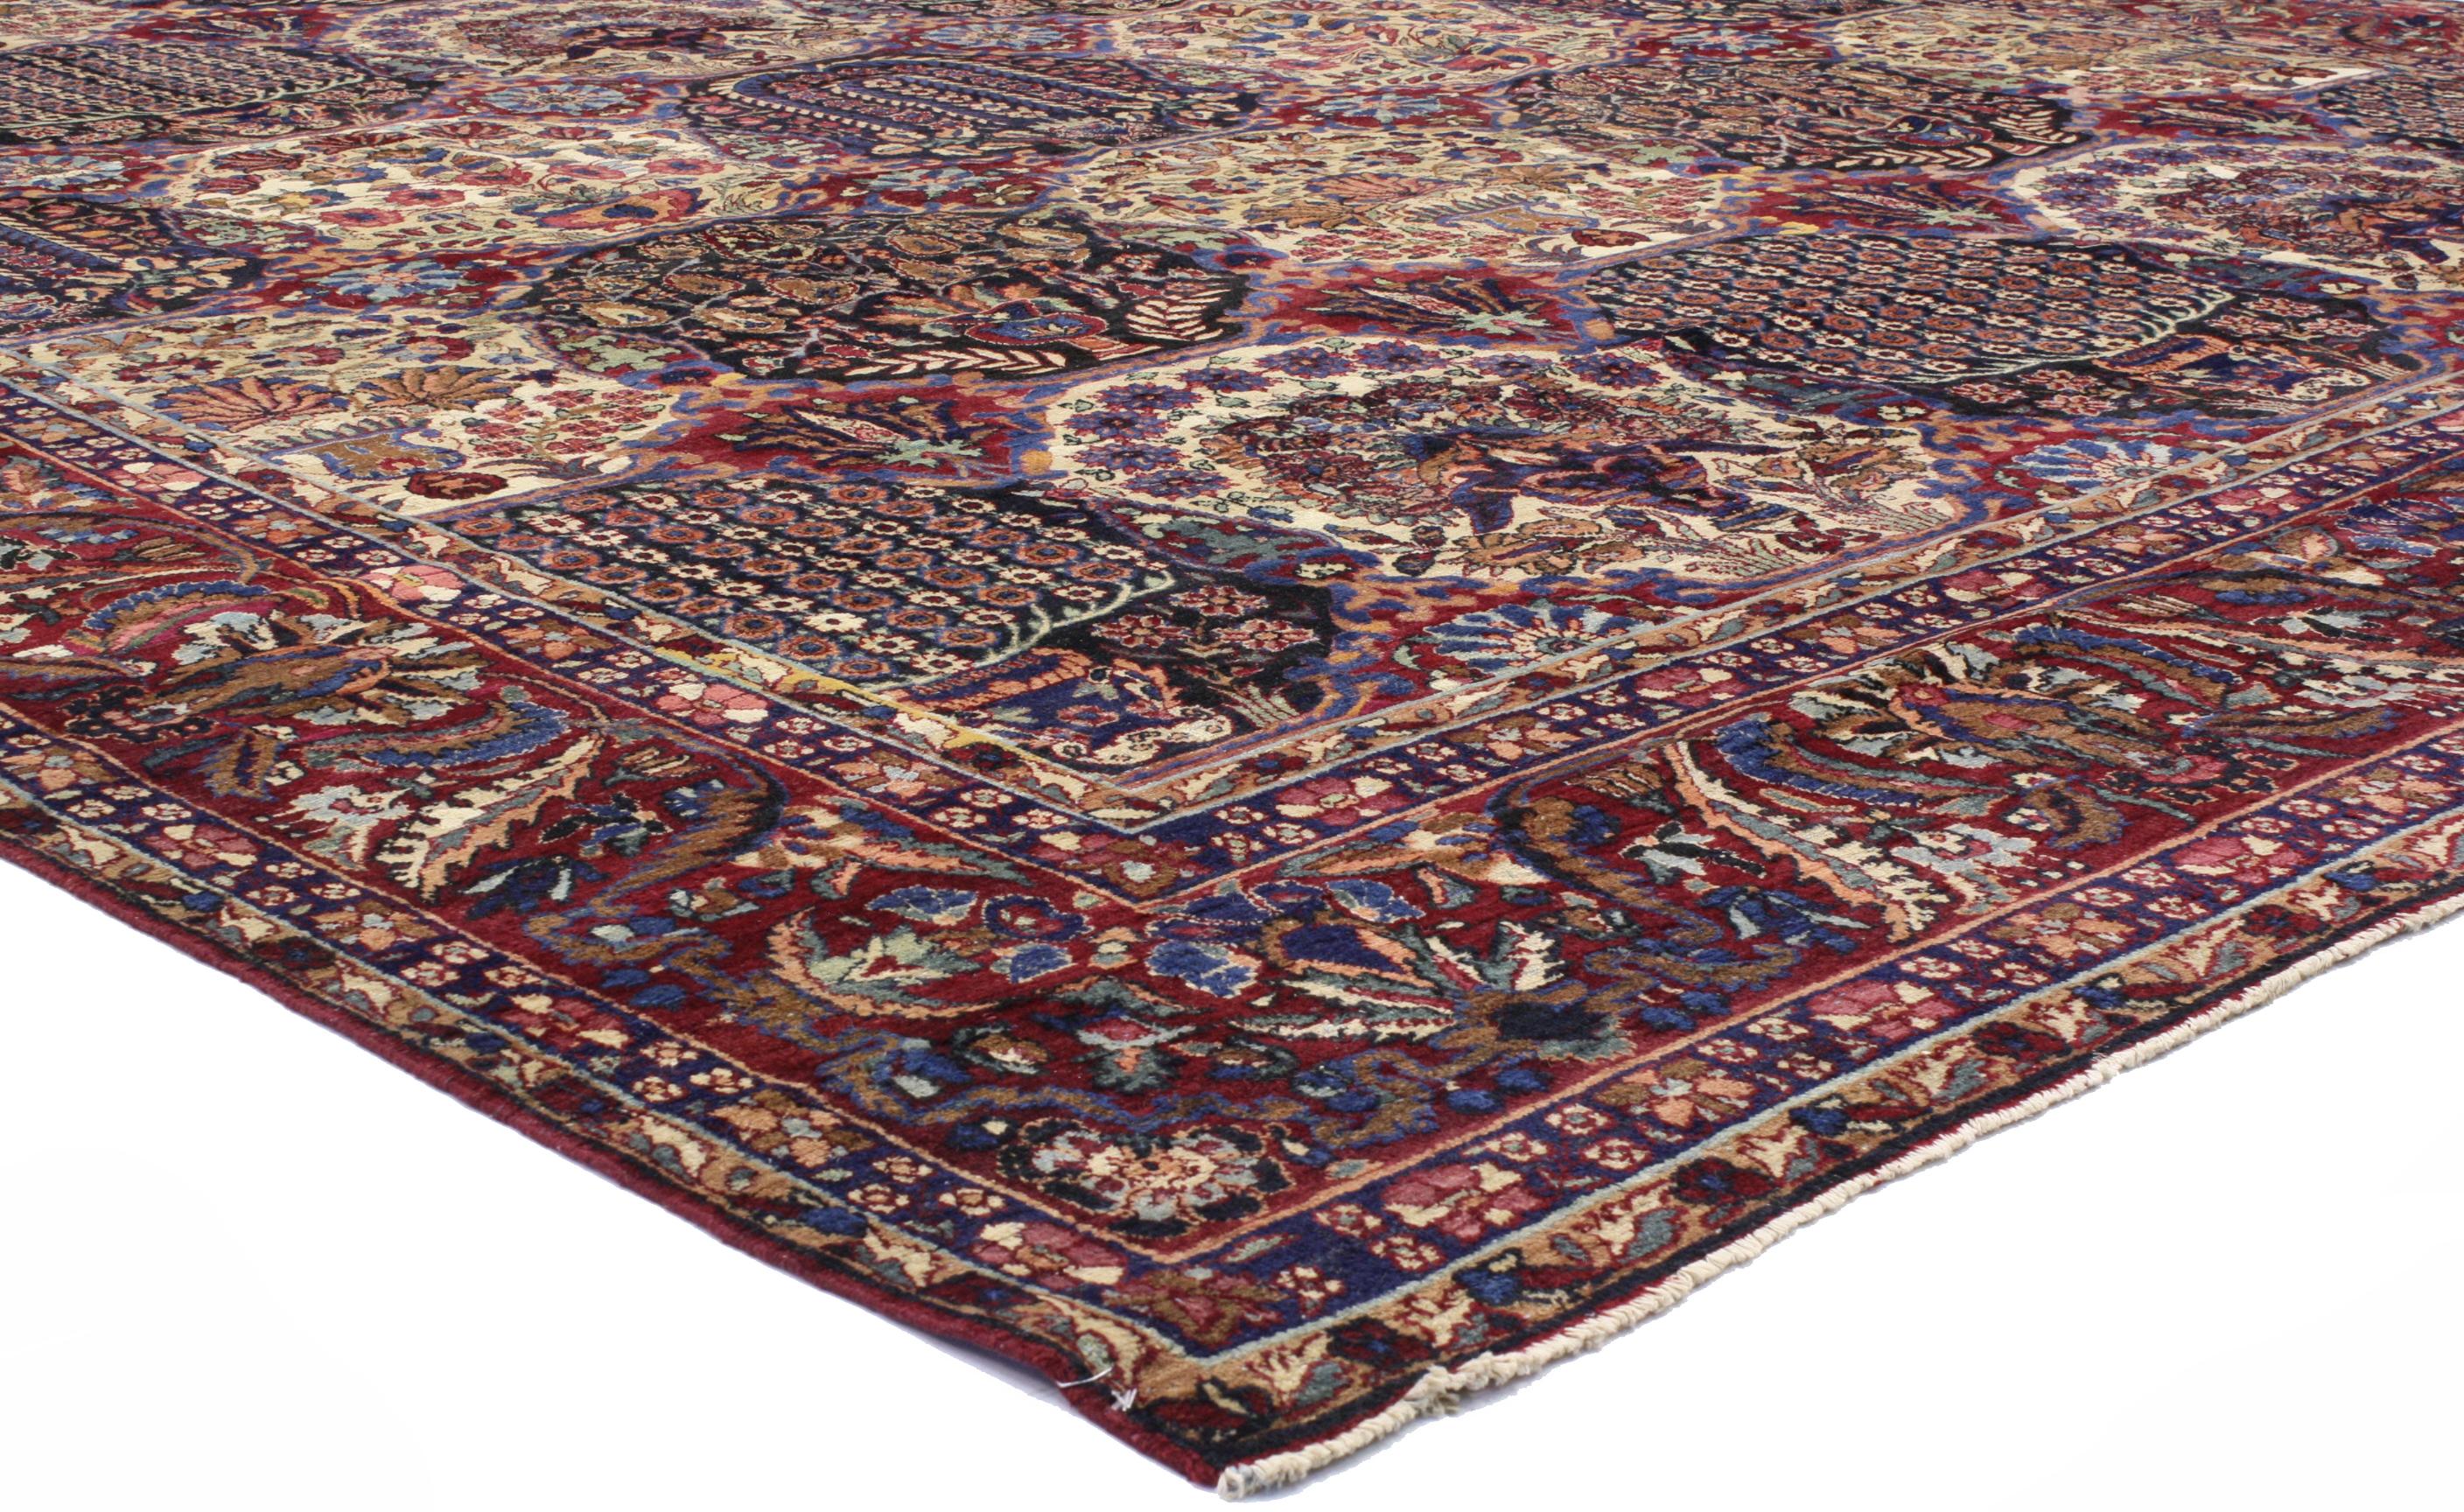 73339 Antique Persian Yazd Palace Rug with Victorian Style and Garden Design. With its beautiful garden design pattern and jewel tone colors, this antique Persian Yazd rug is filled with meticulous details as the tessellation unfolds throughout the